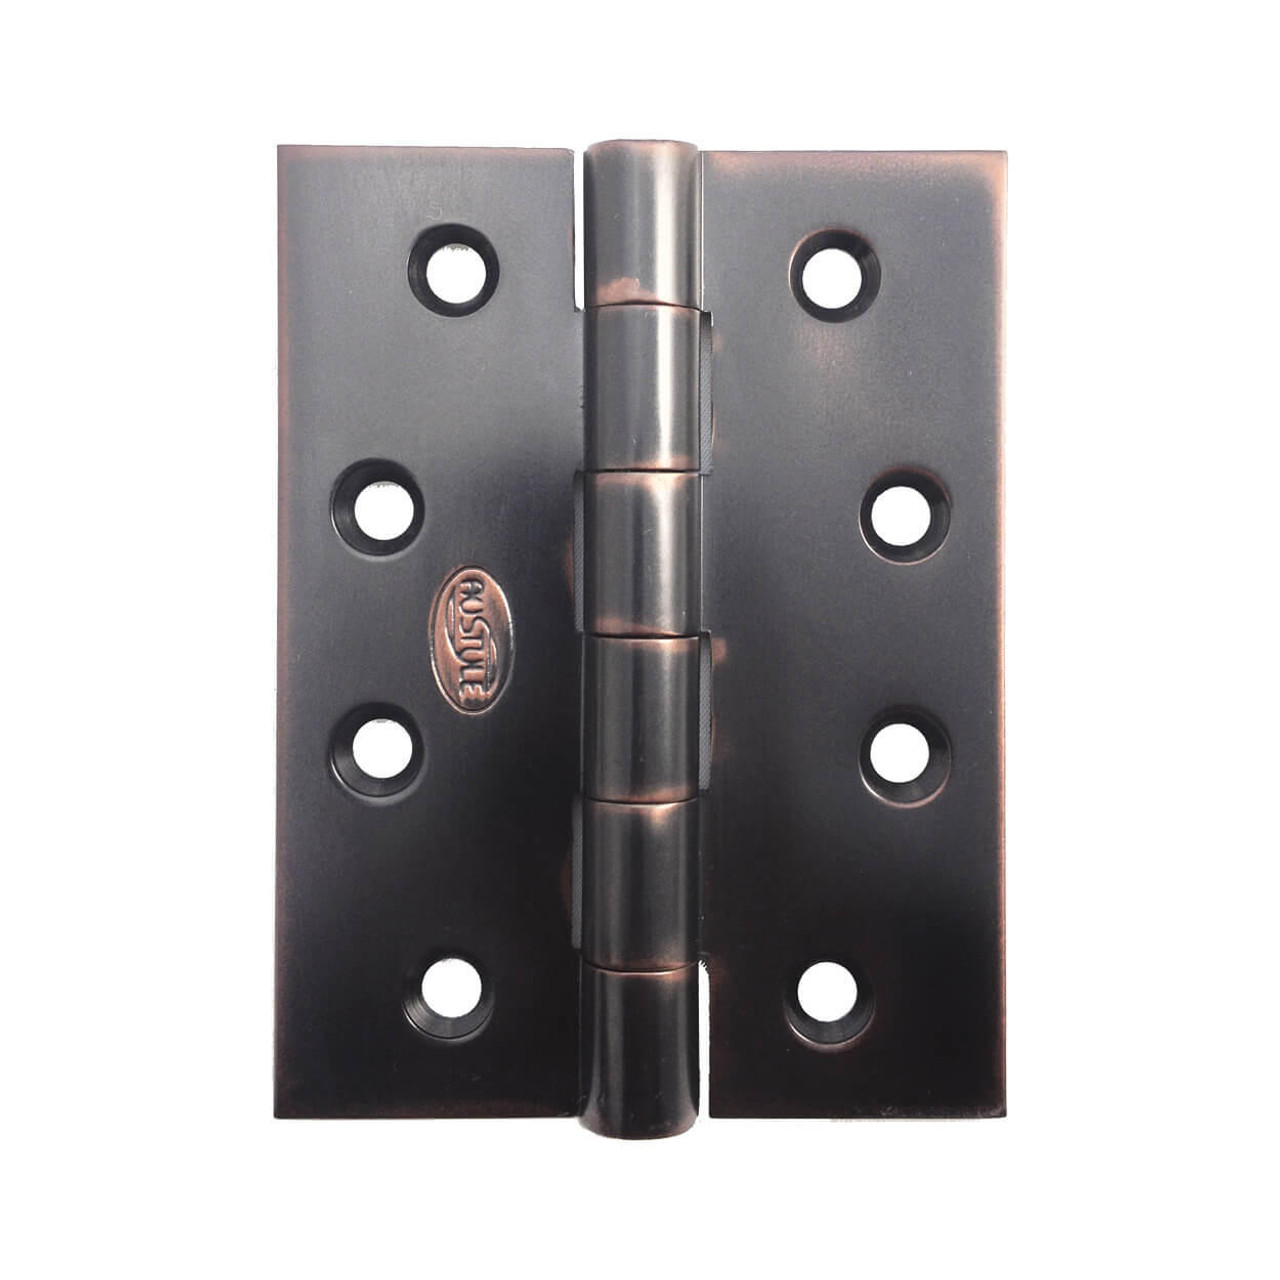  Austyle 304SS Butt Hinge Fixed Pin inc Screws (pair) 100x75x2.5mm Antique Copper 25008 